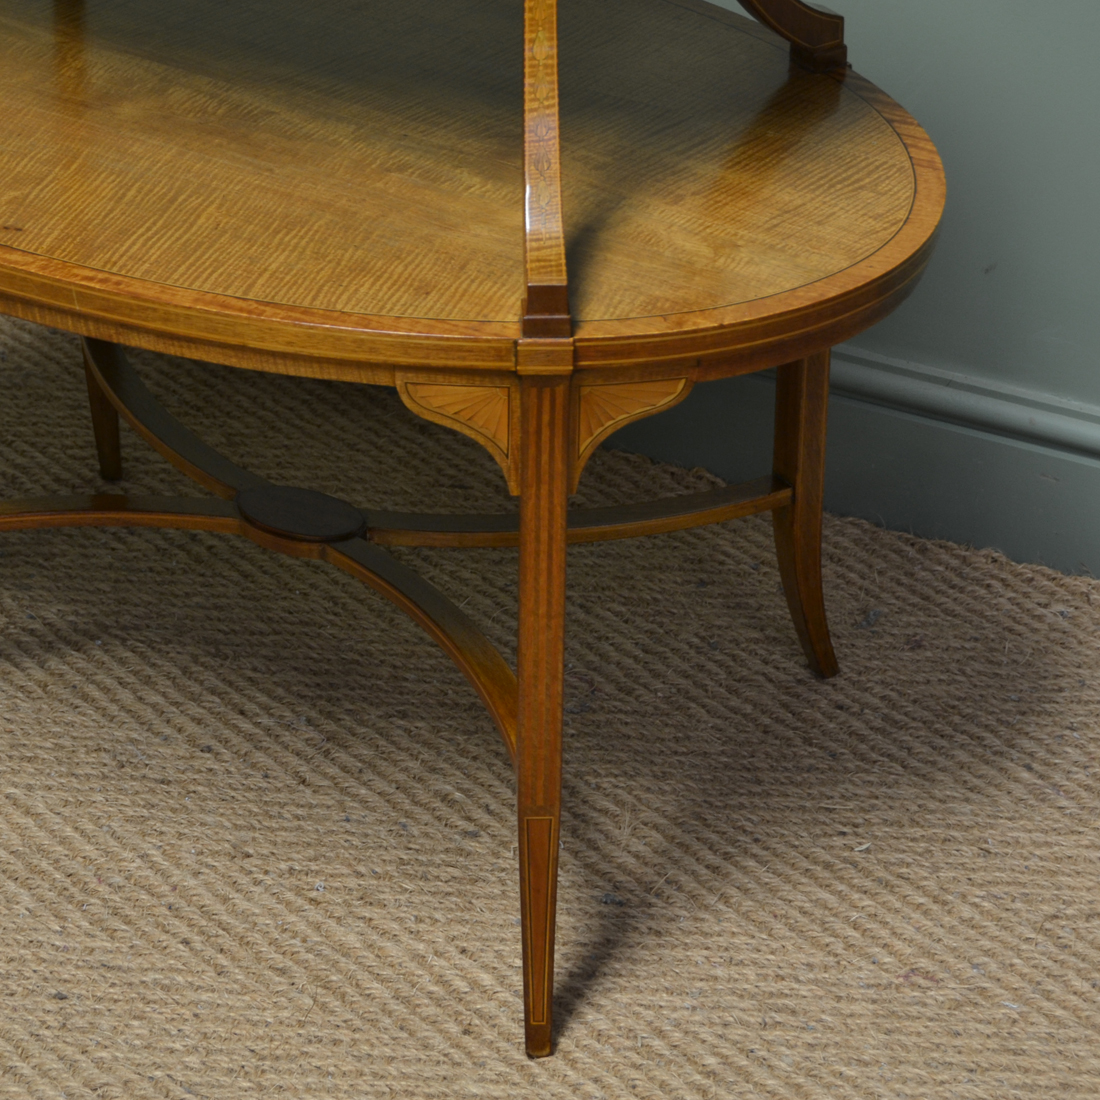 Superb Quality Edwards & Roberts Satinwood Two Tier Occasional / Lamp Table - Image 8 of 9